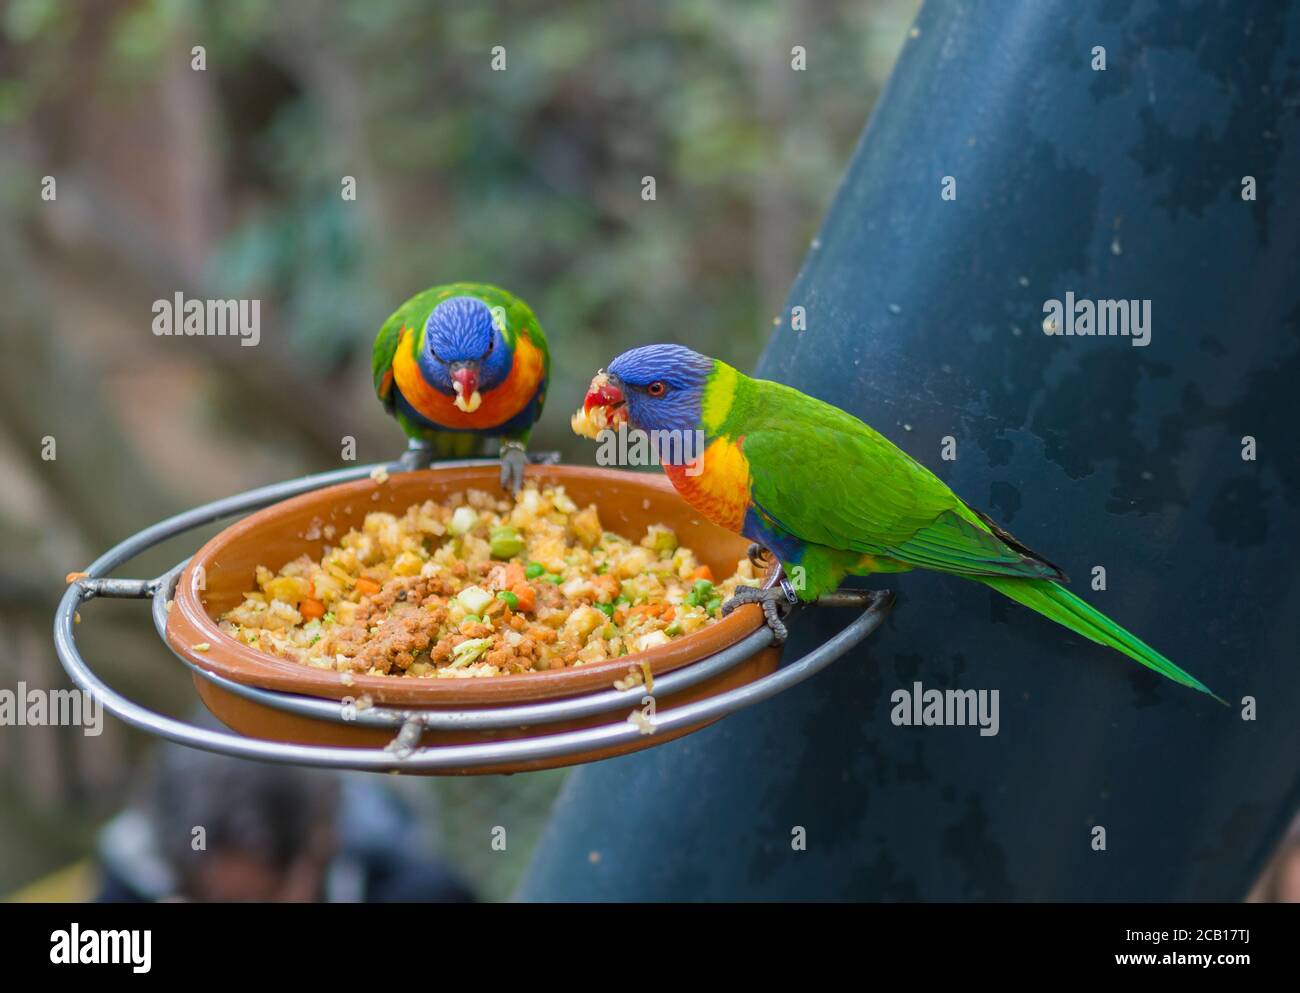 two close up exotic colorful red blue green parrot Agapornis lorikeet eating feeding from bowl of grain Stock Photo